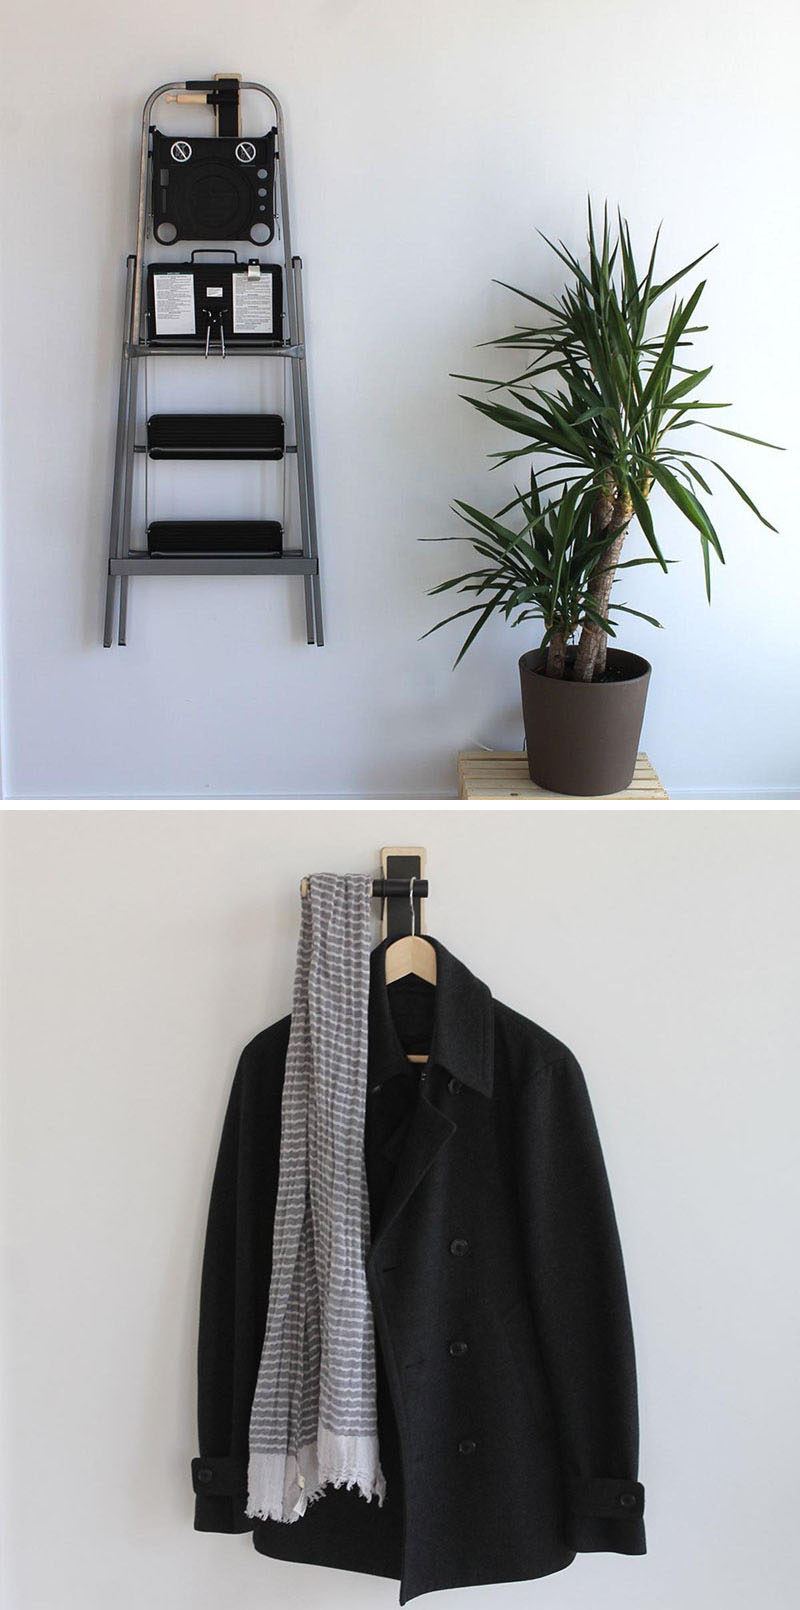 IPPINKA have designed Lift, a minimal mulit-use wall-mounted hook made from steel, wood, and leather, that can hold everything from your jacket to a full sized bike.